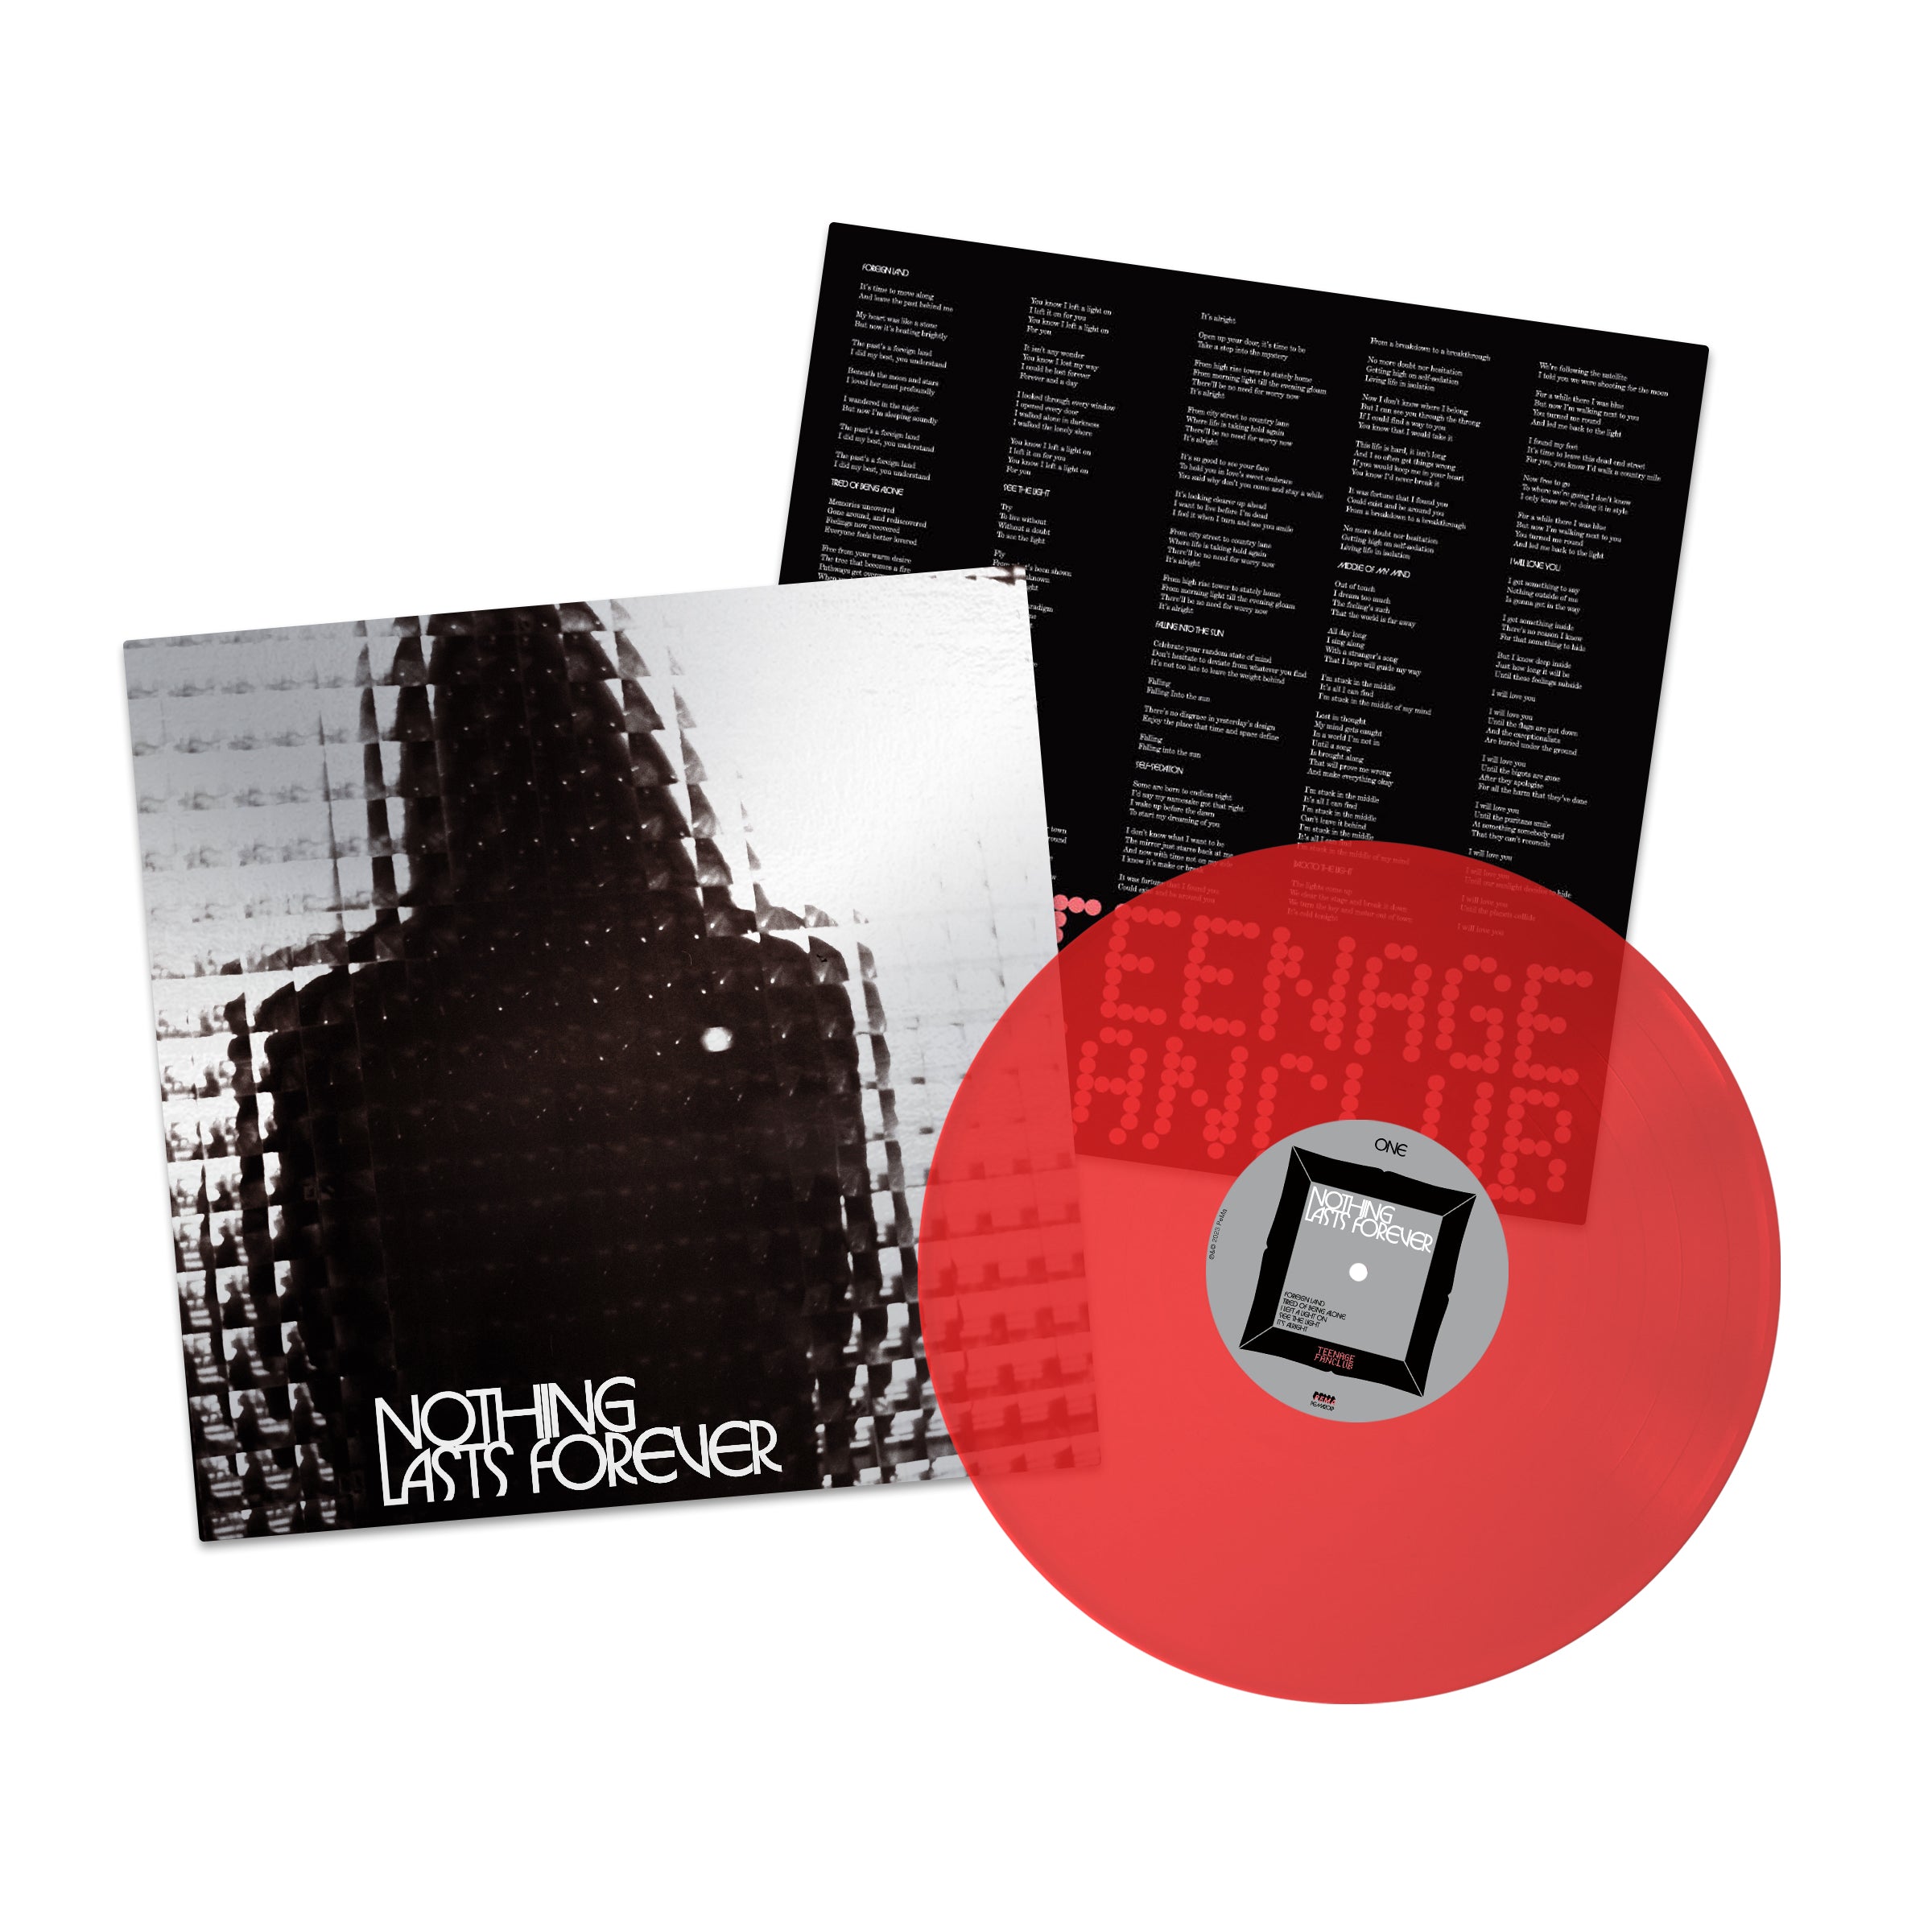 Nothing Lasts Forever: Limited Translucent Red Vinyl LP